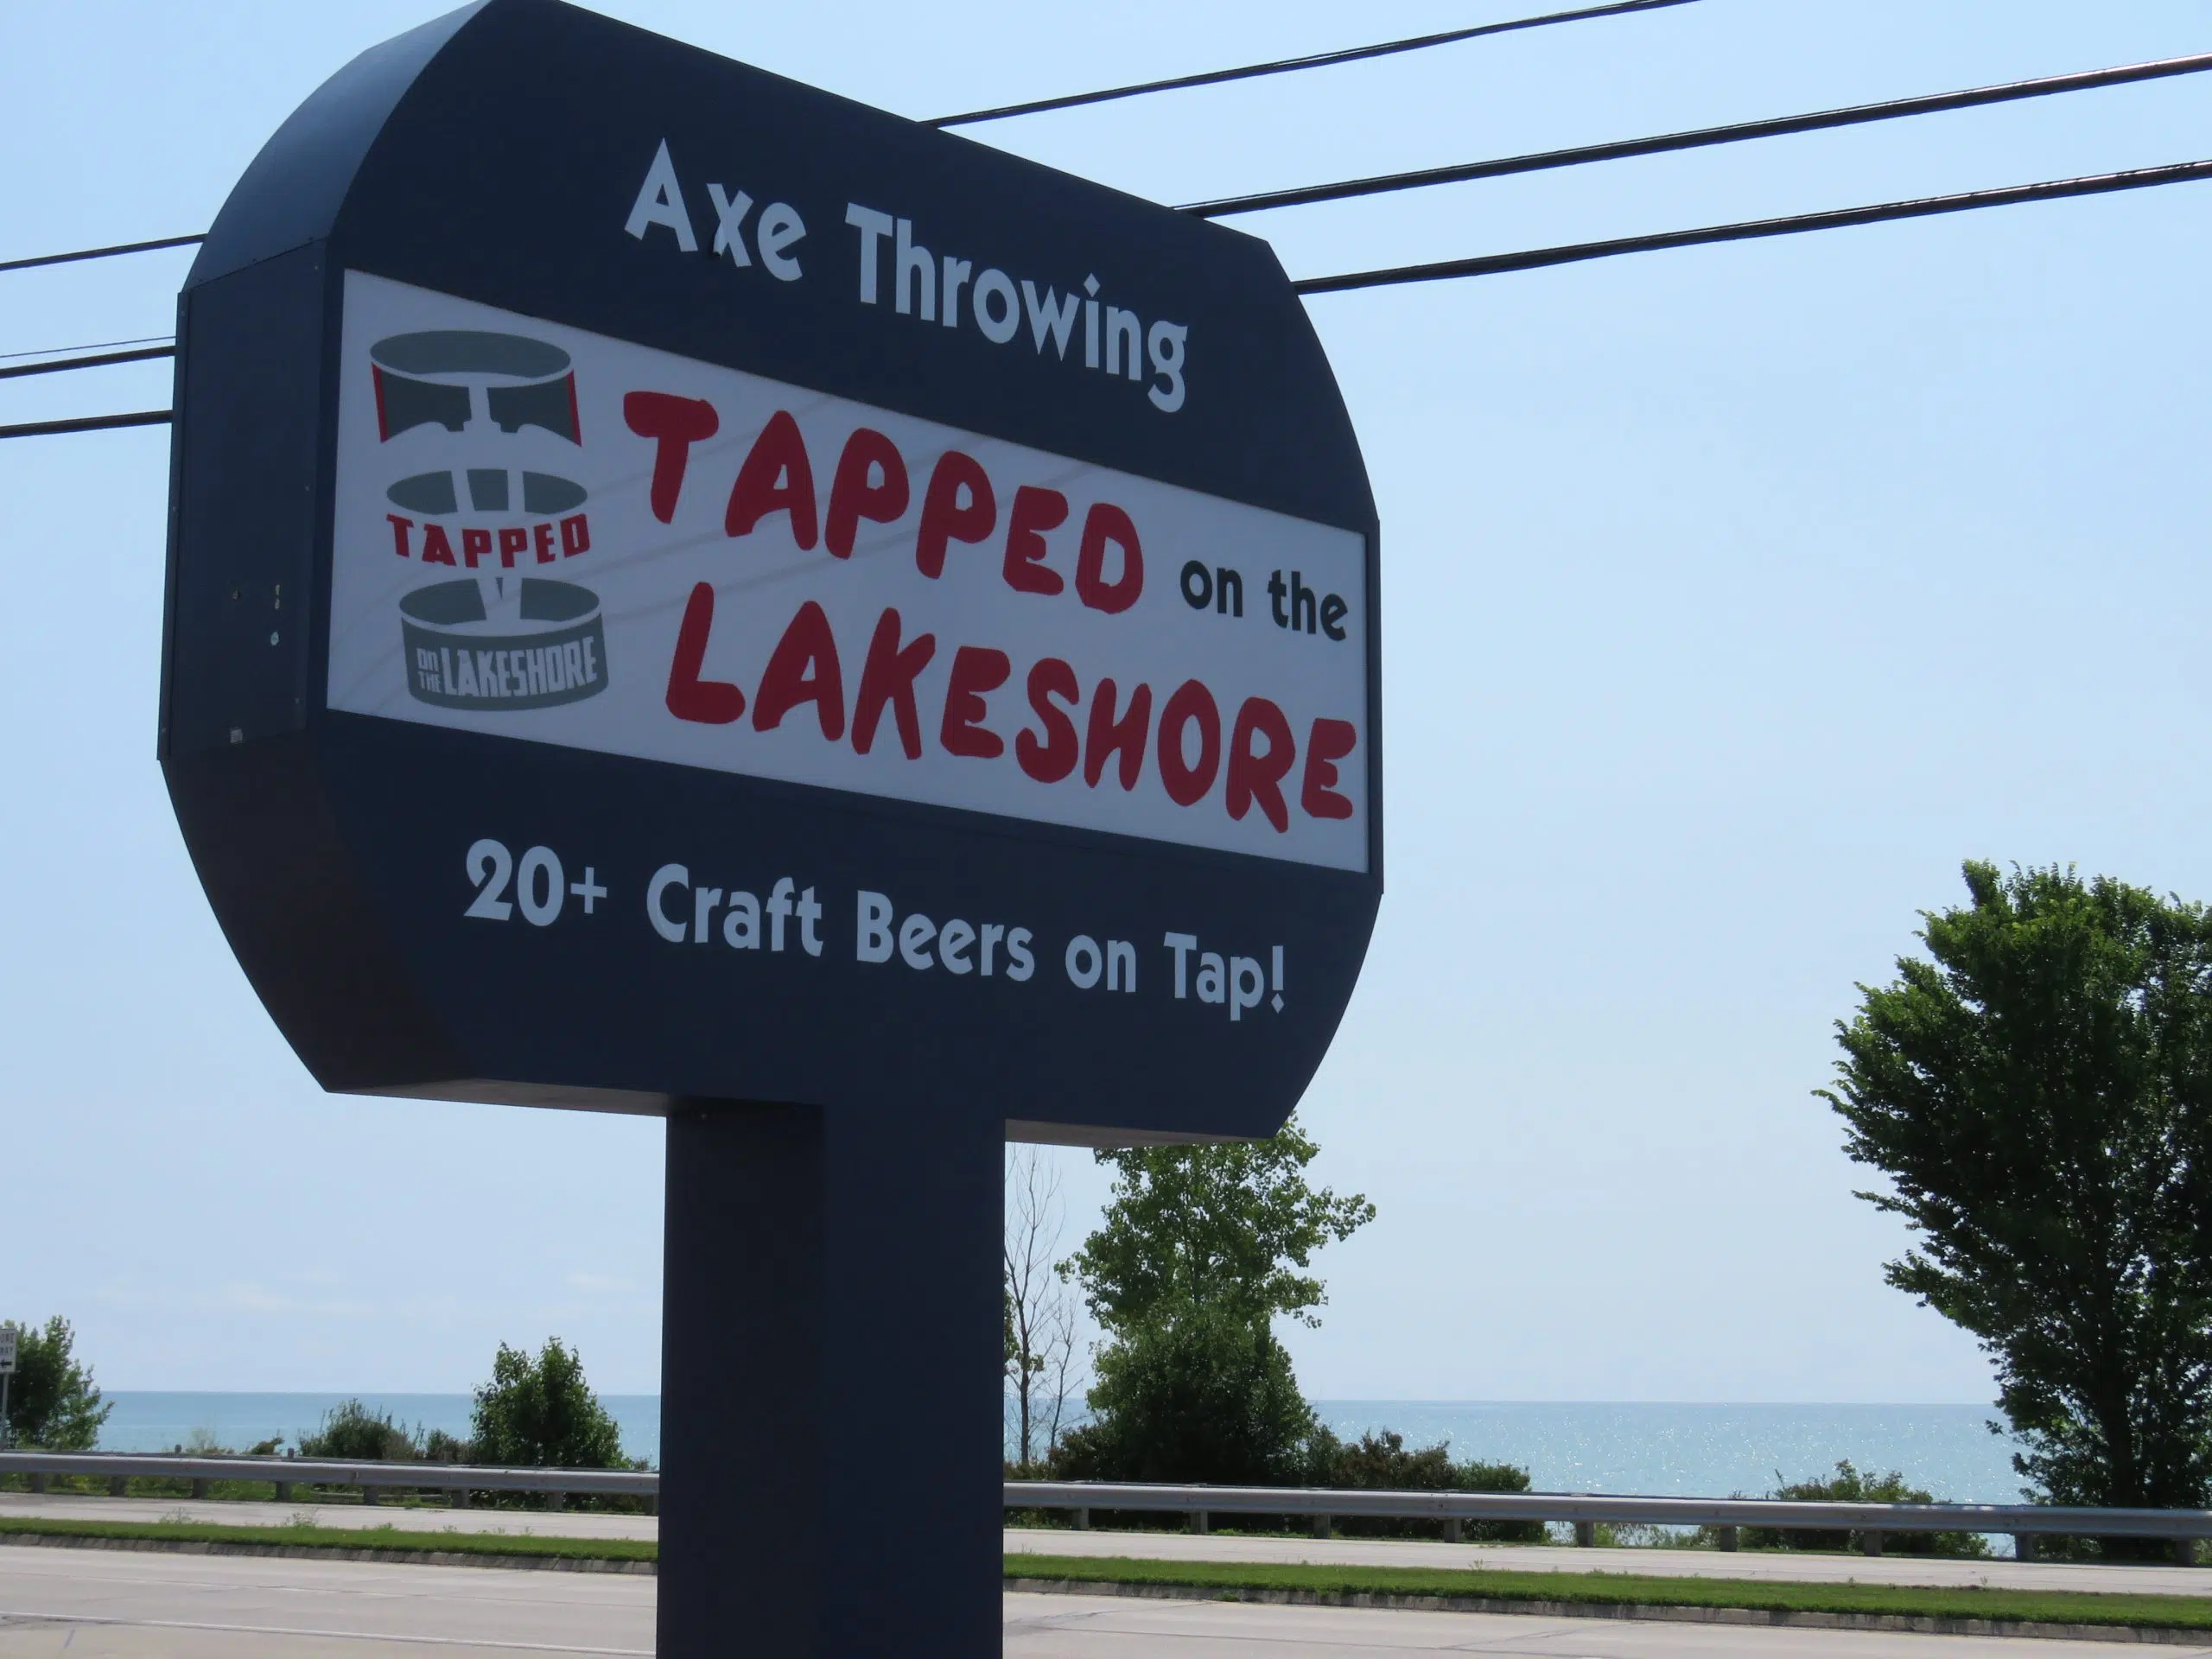 Tapped on the Lakeshore to Open Soon 